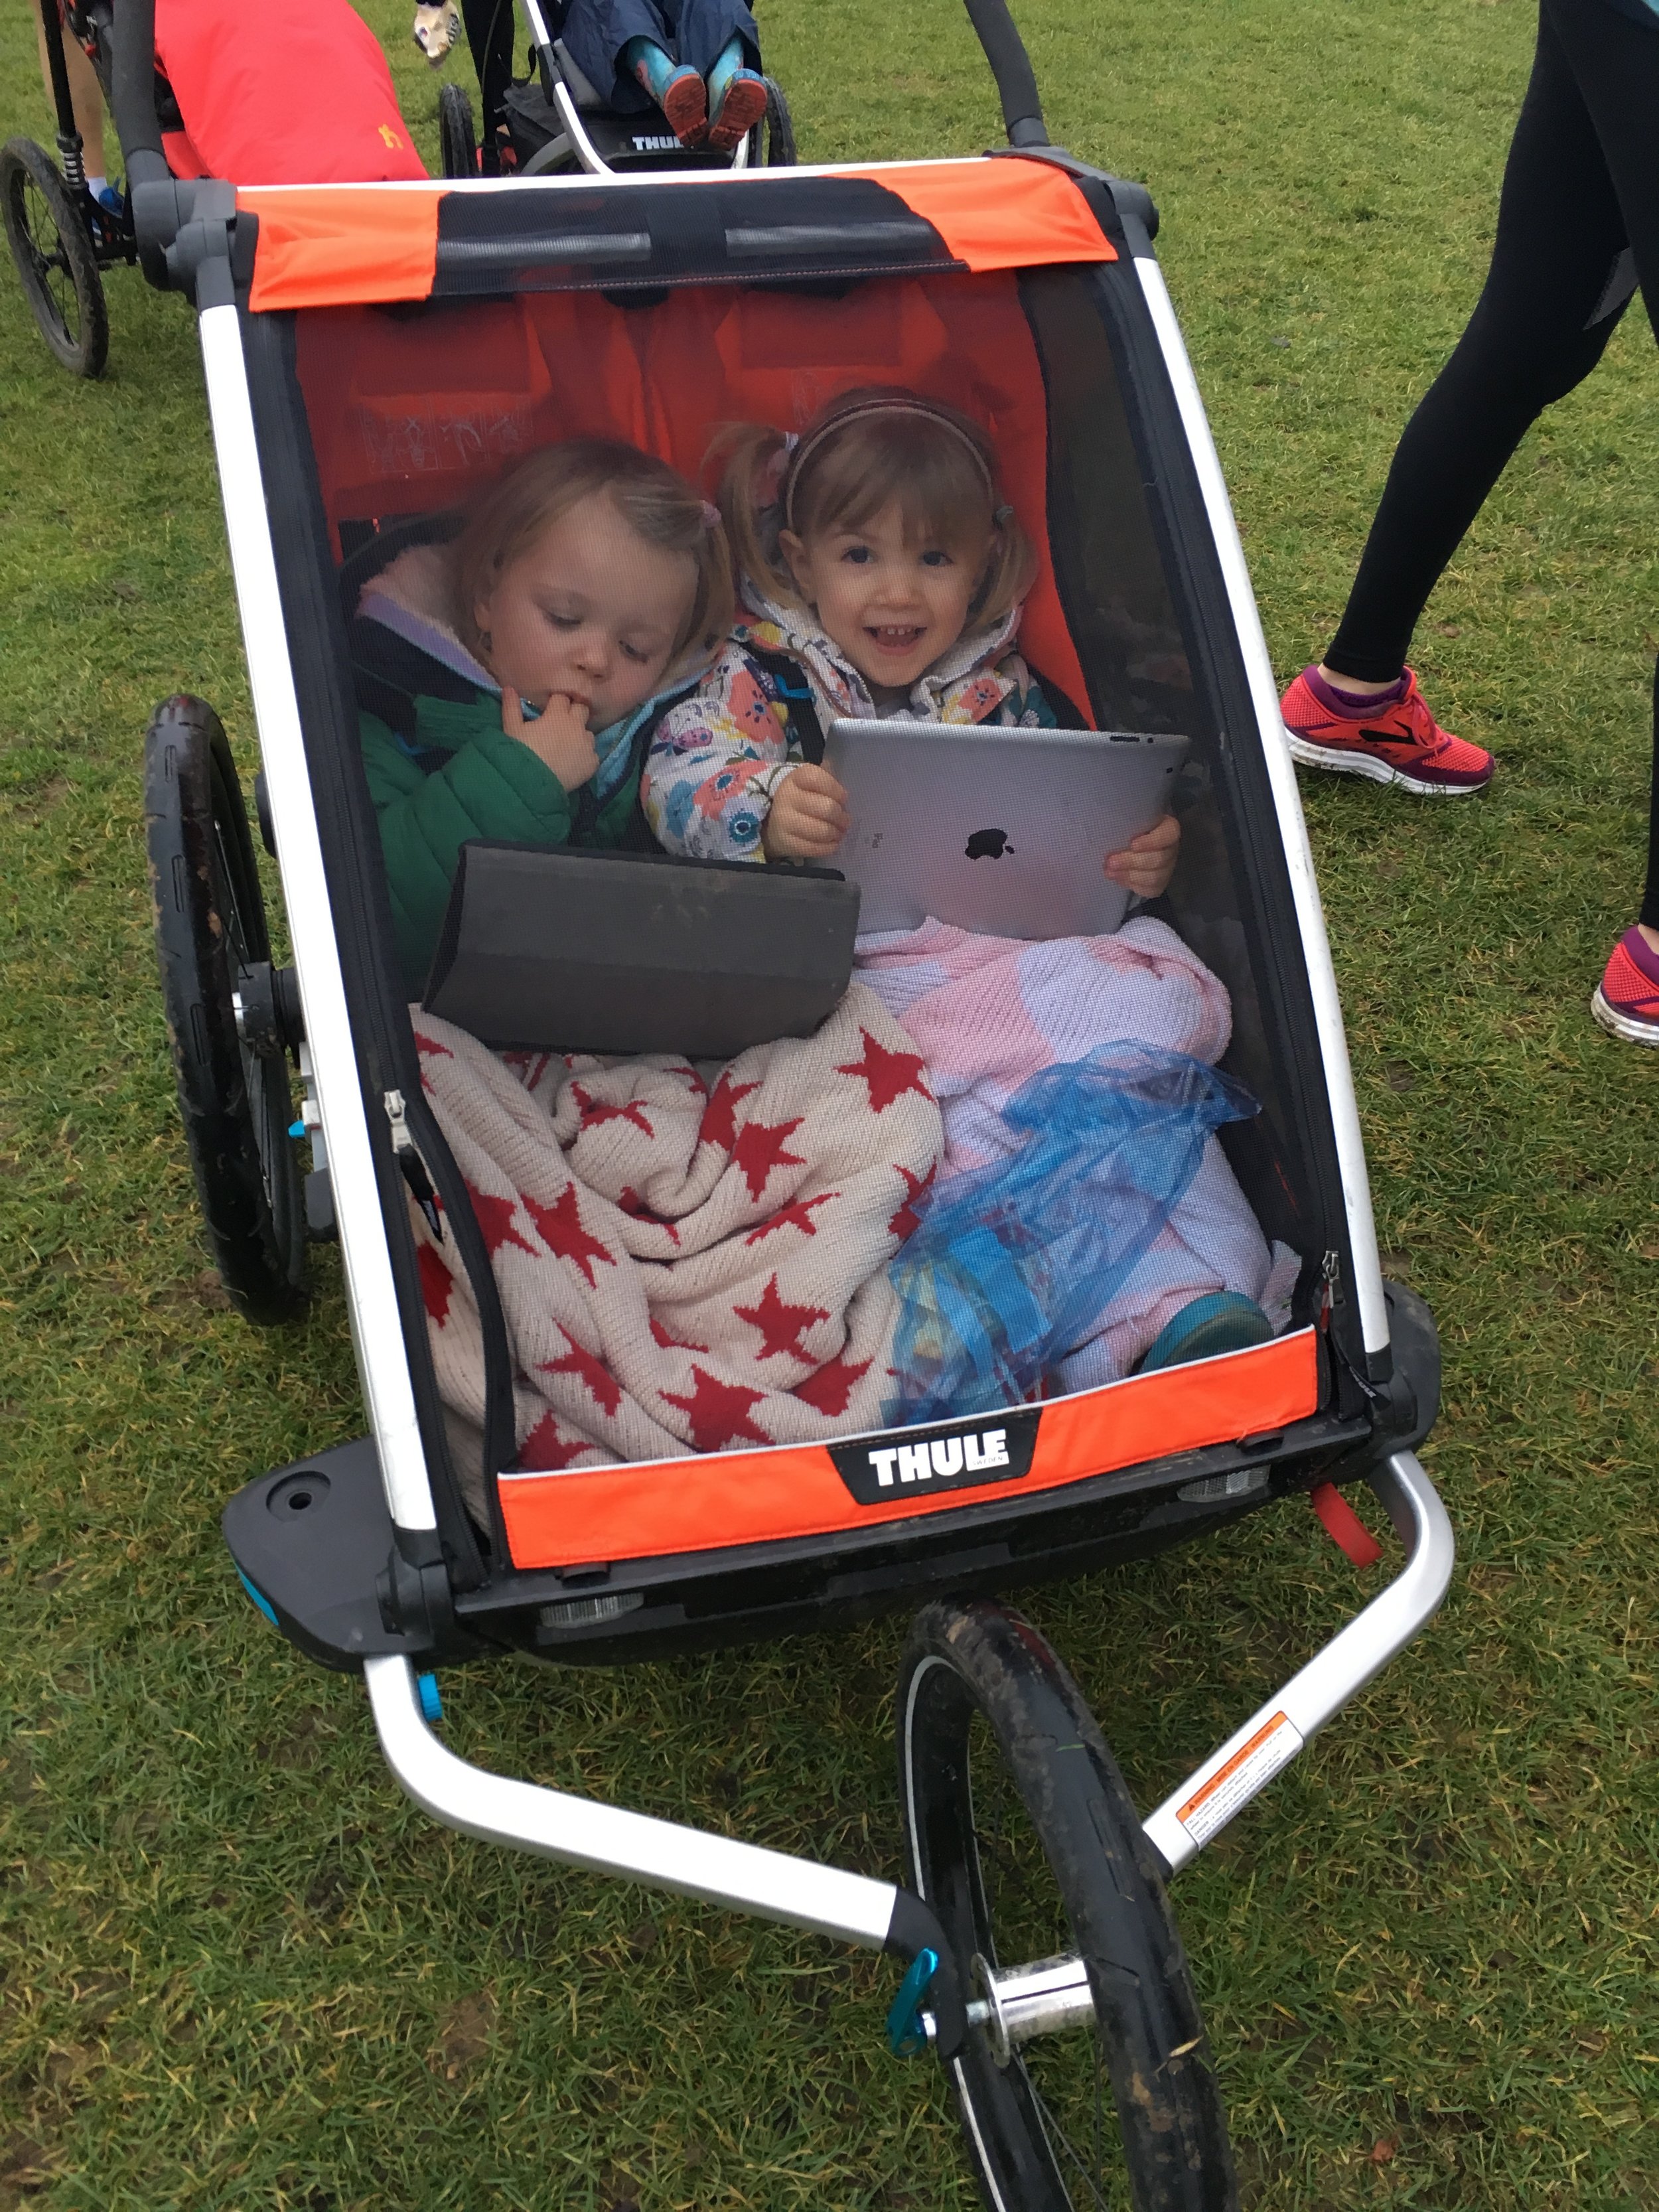 kids double pushchair